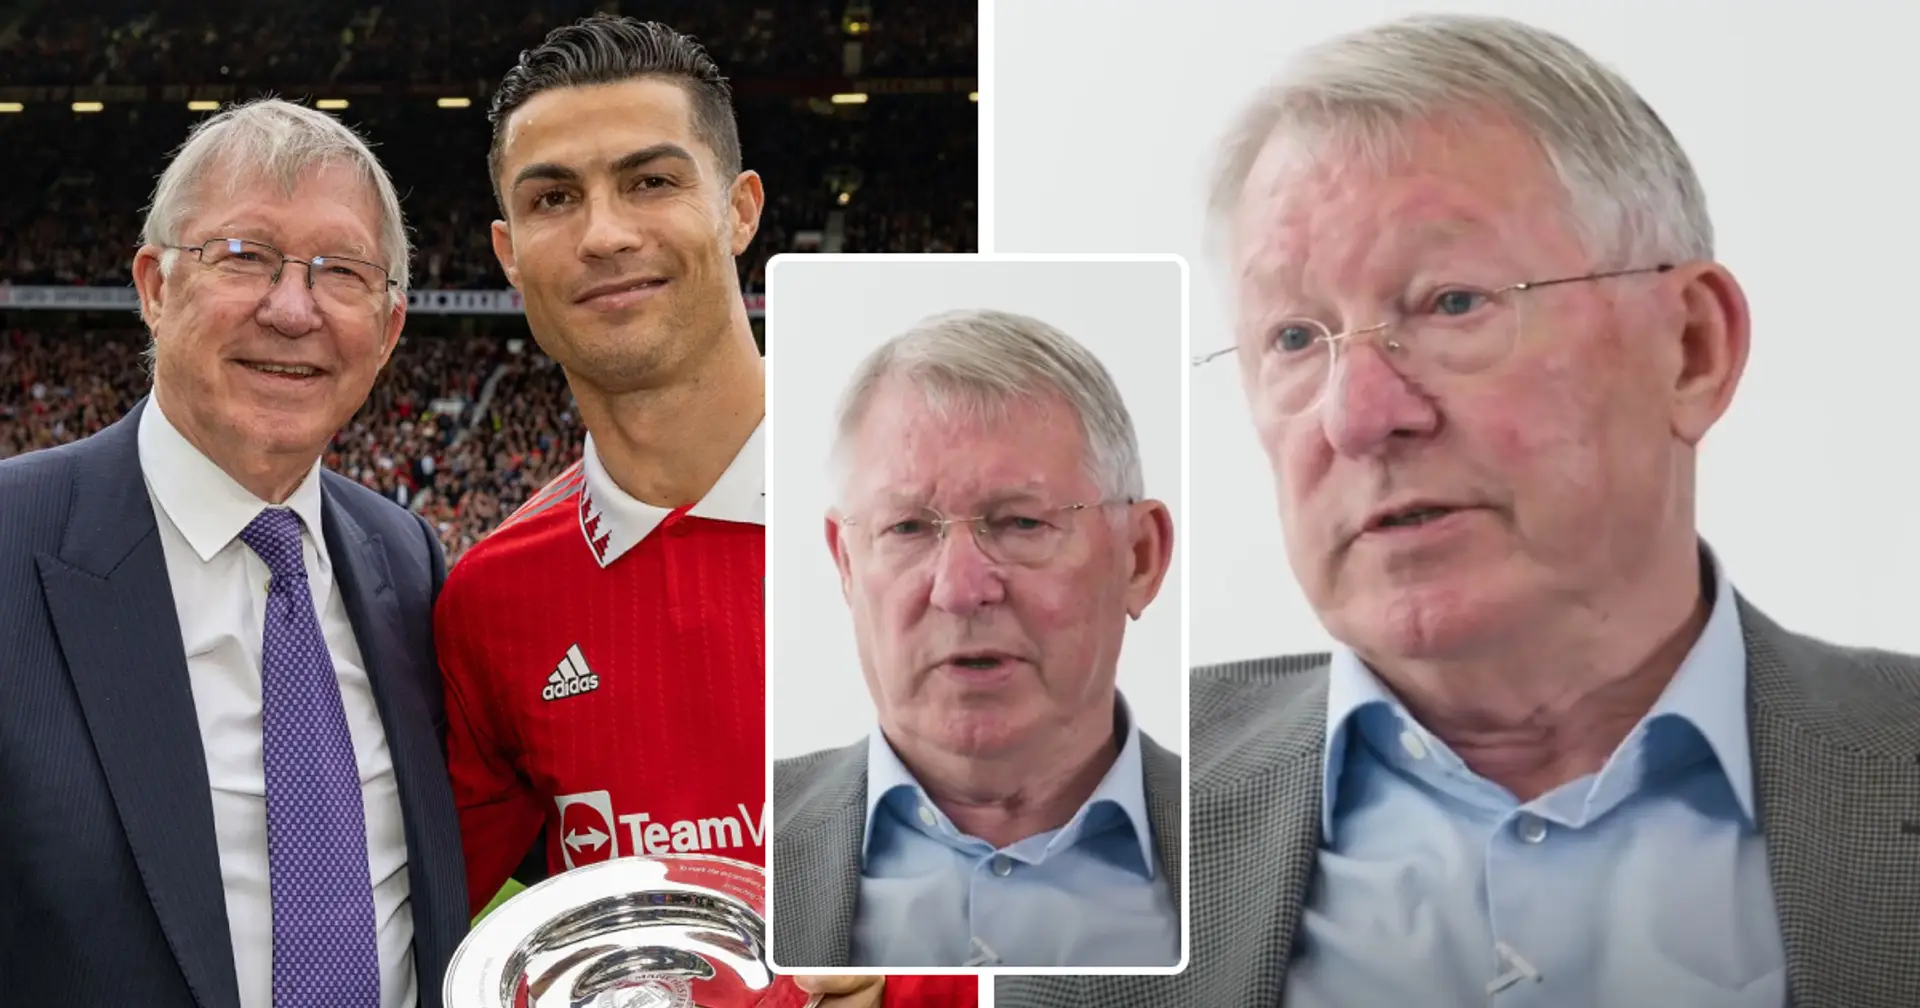 Sir Alex Ferguson revealed one player he wishes he managed at Man Utd but never did